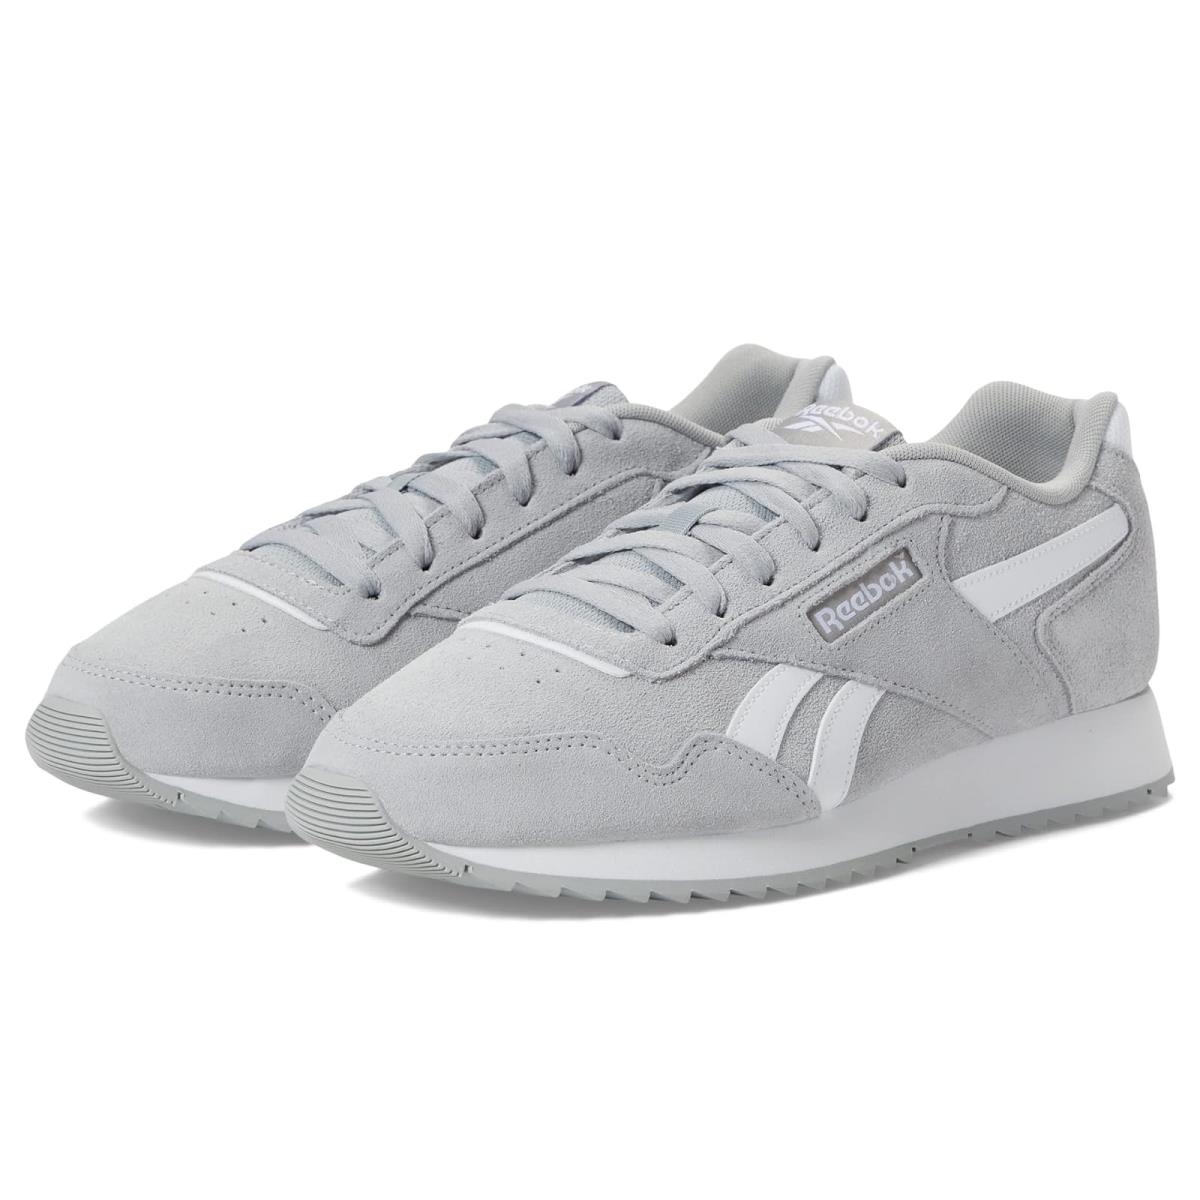 Man`s Sneakers Athletic Shoes Reebok Glide Ripple Pure Grey/White